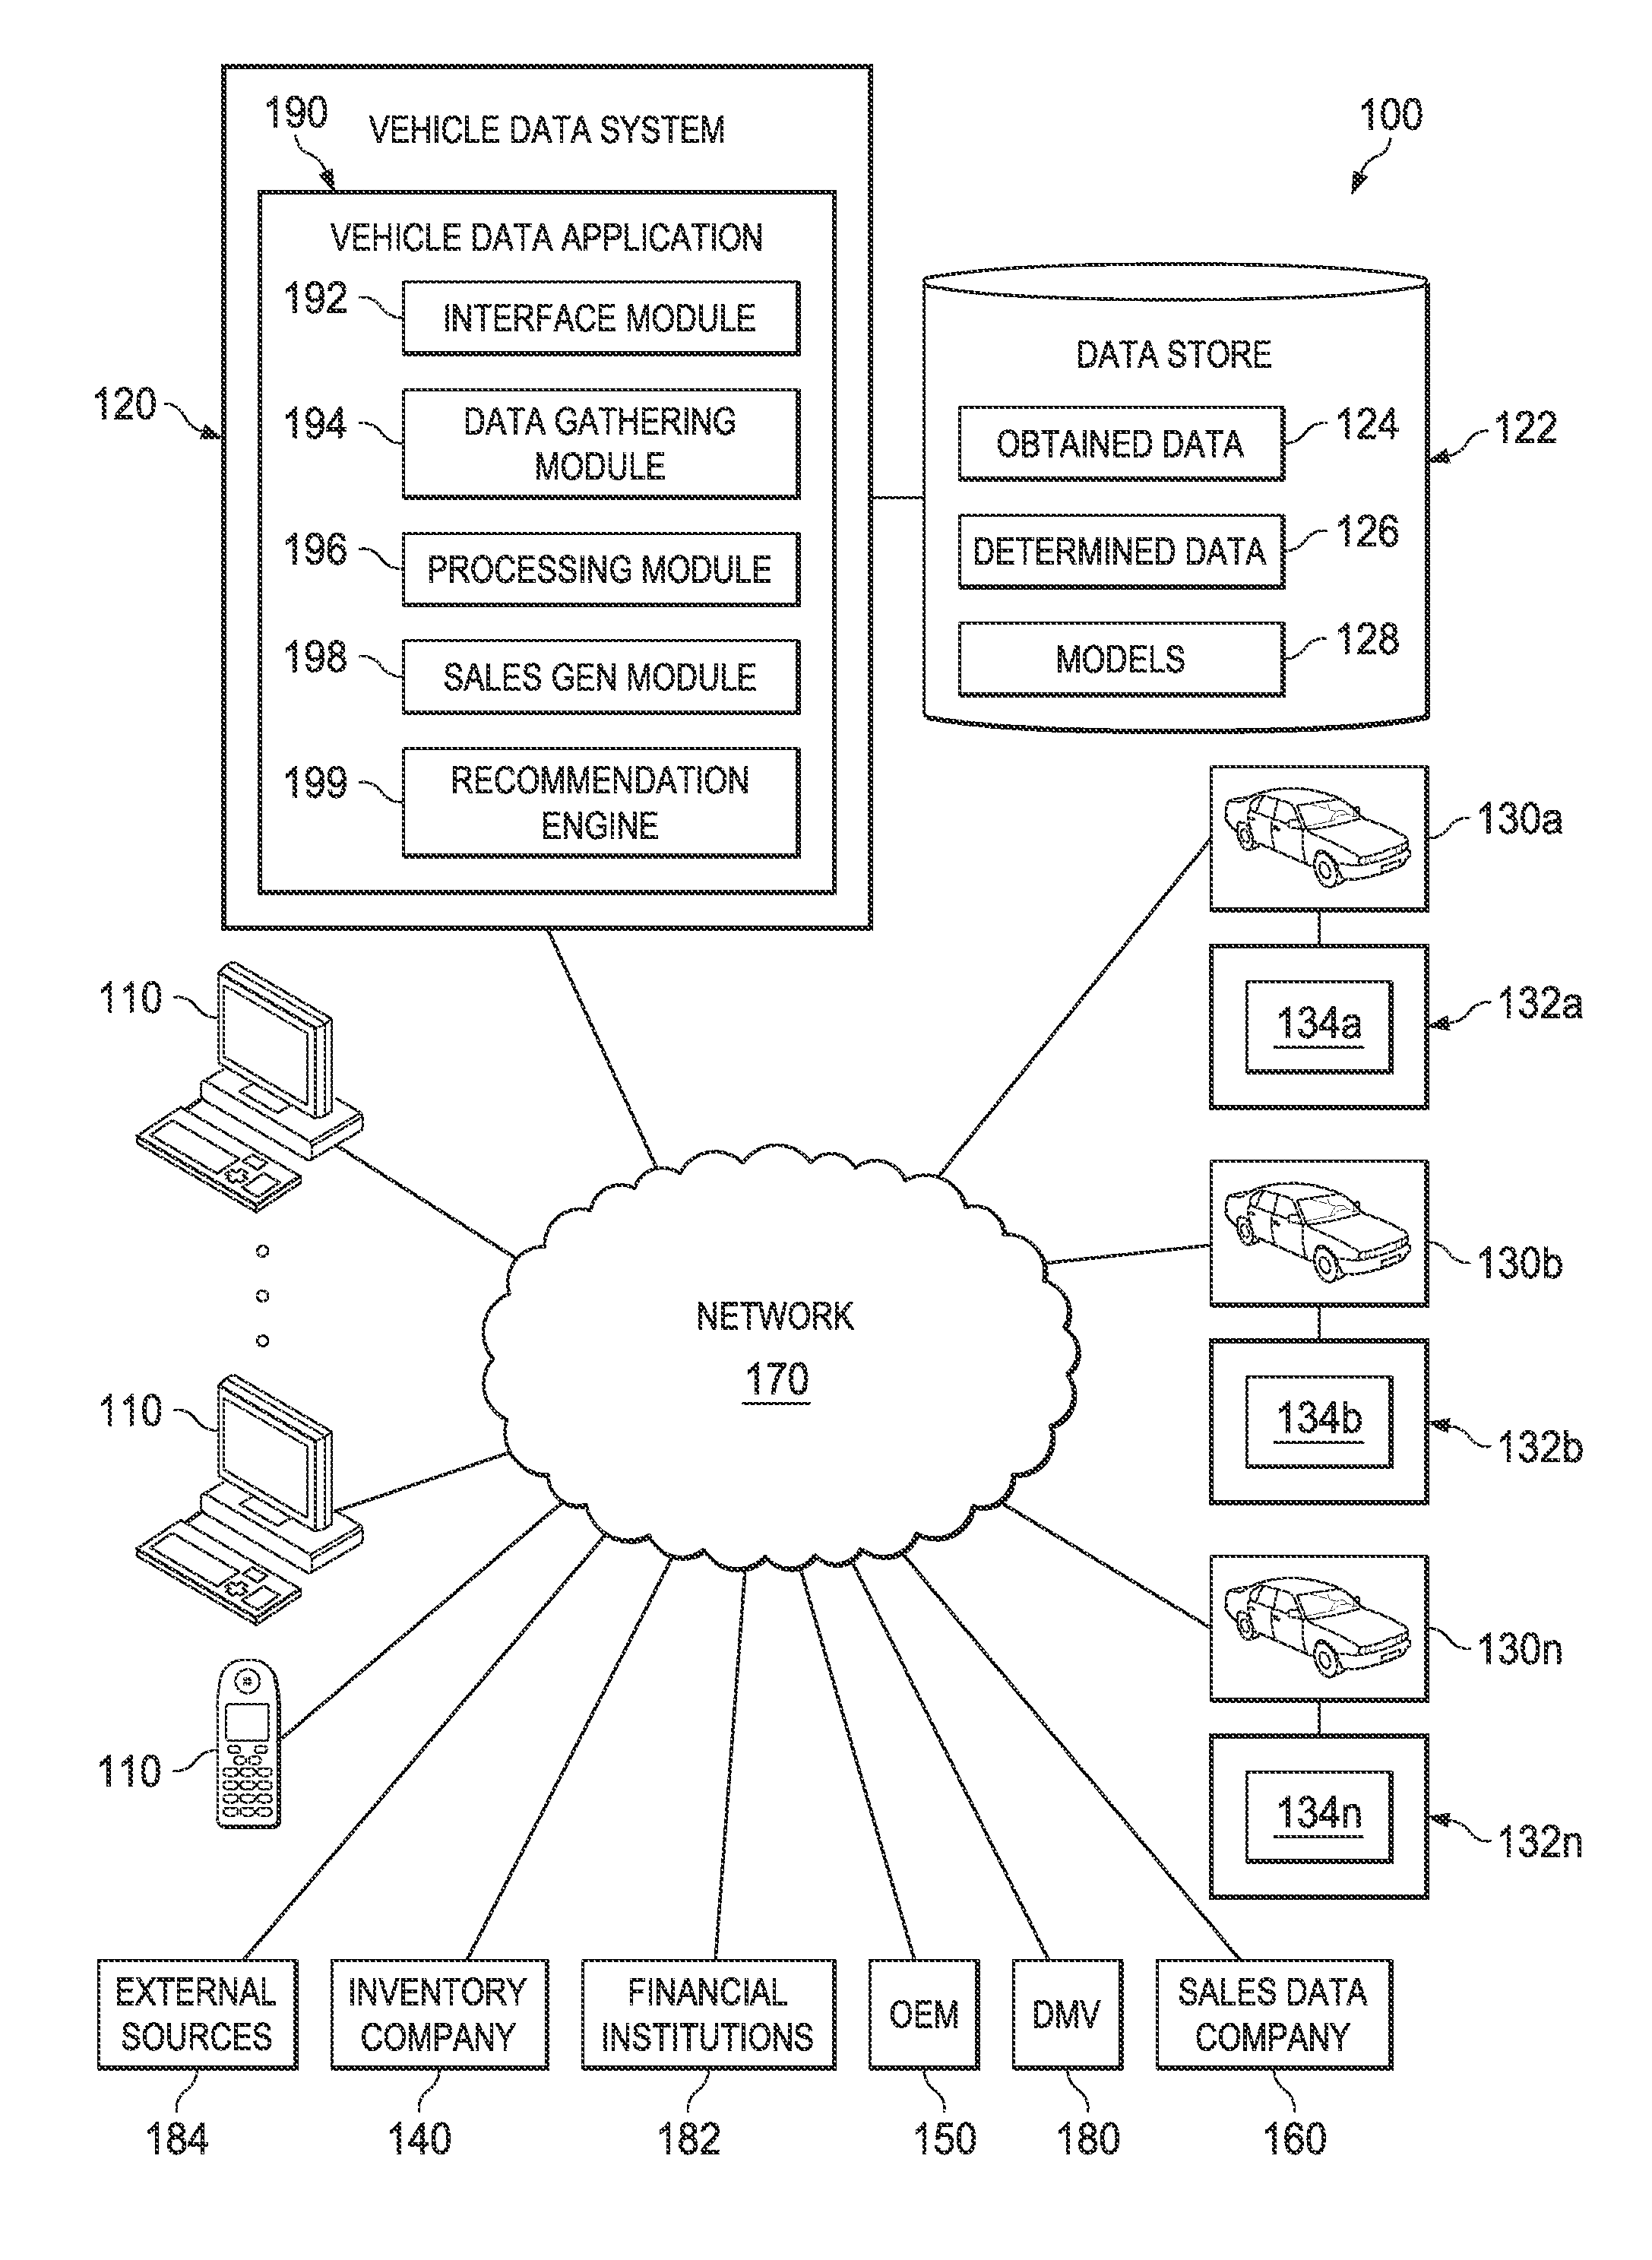 Systems and methods for vehicle purchase recommendations